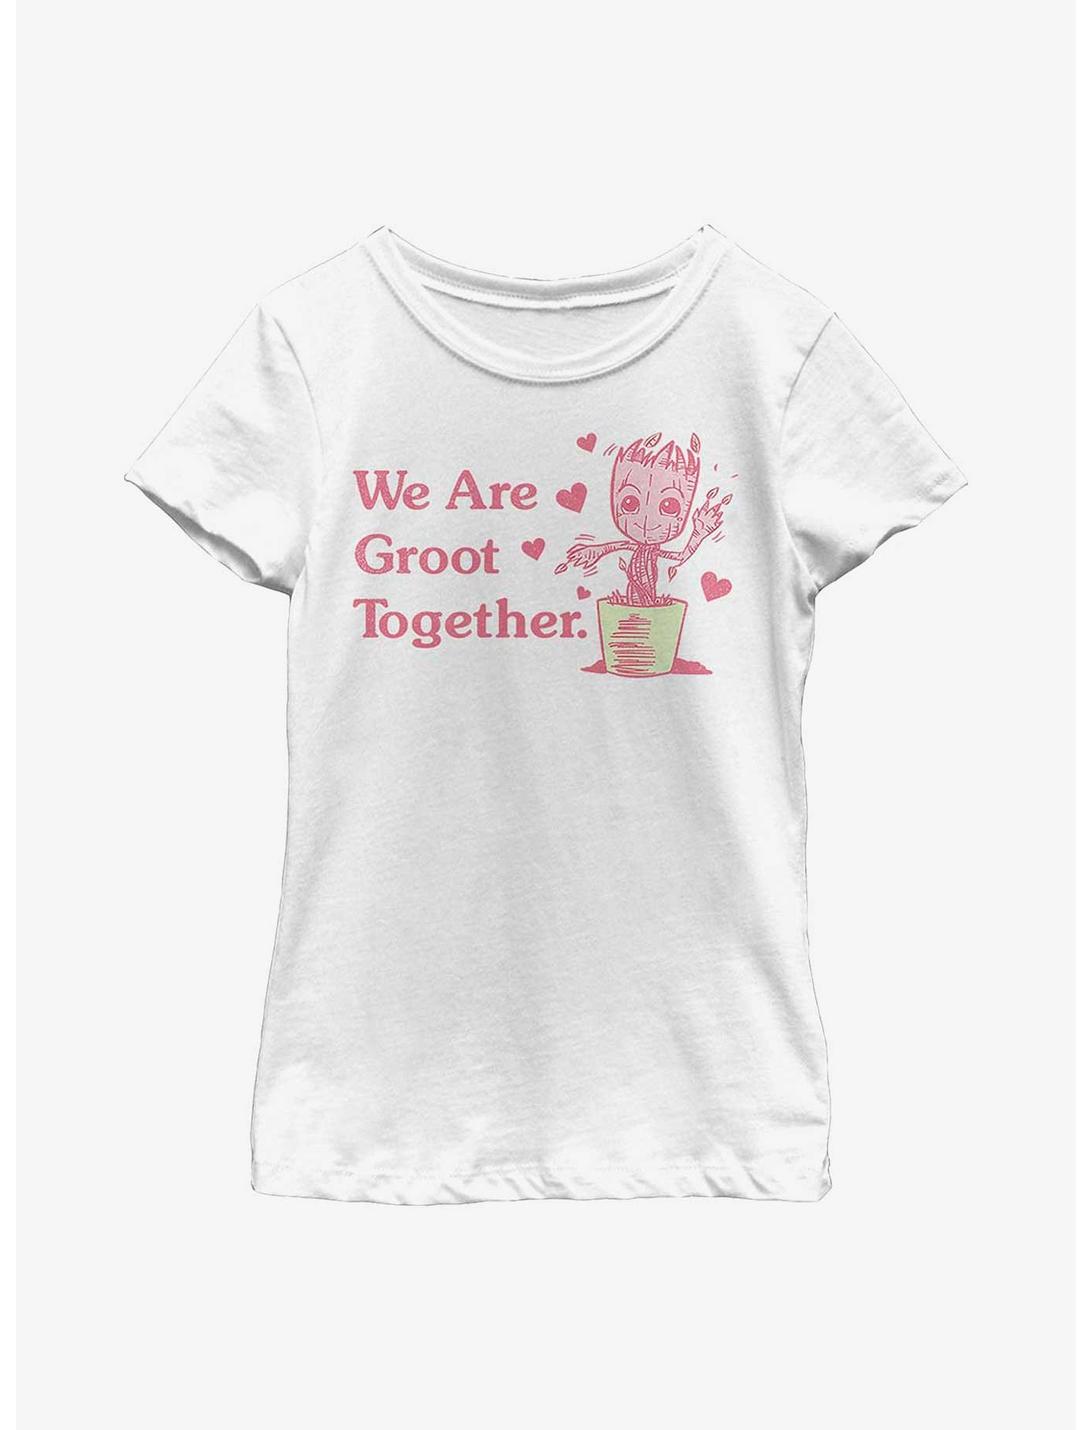 Marvel Guardians of the Galaxy We Are Groot Together Youth Girls T-Shirt, WHITE, hi-res